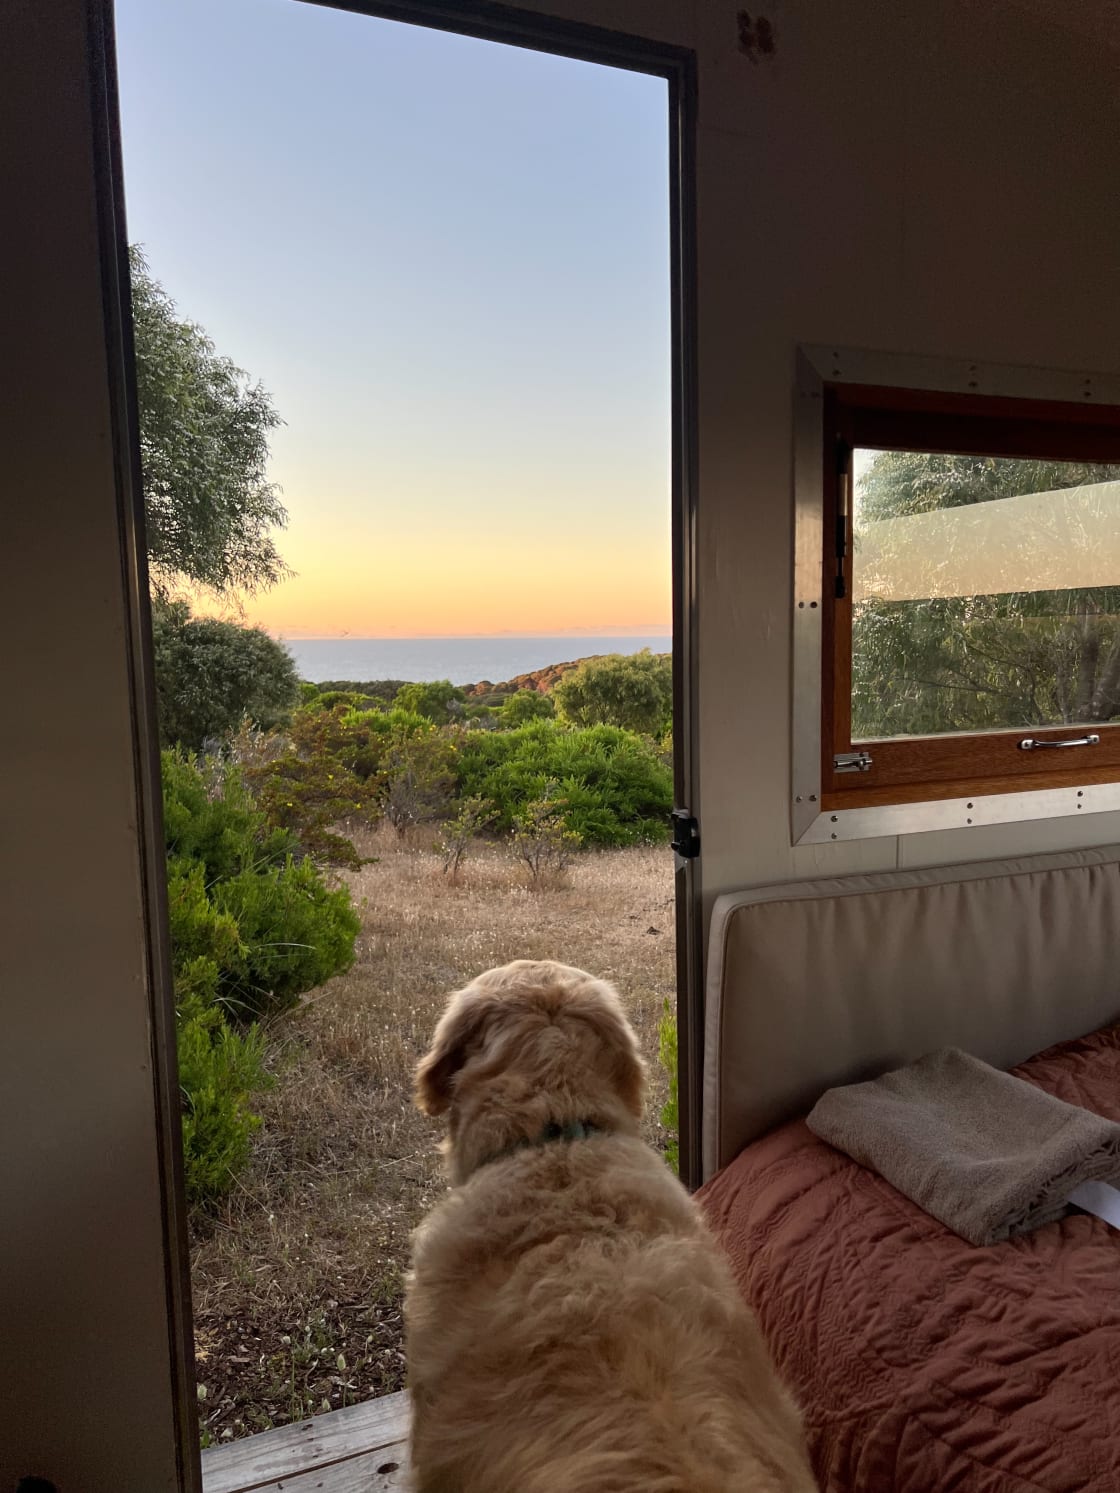 Guess what! Even our dog loves the view.